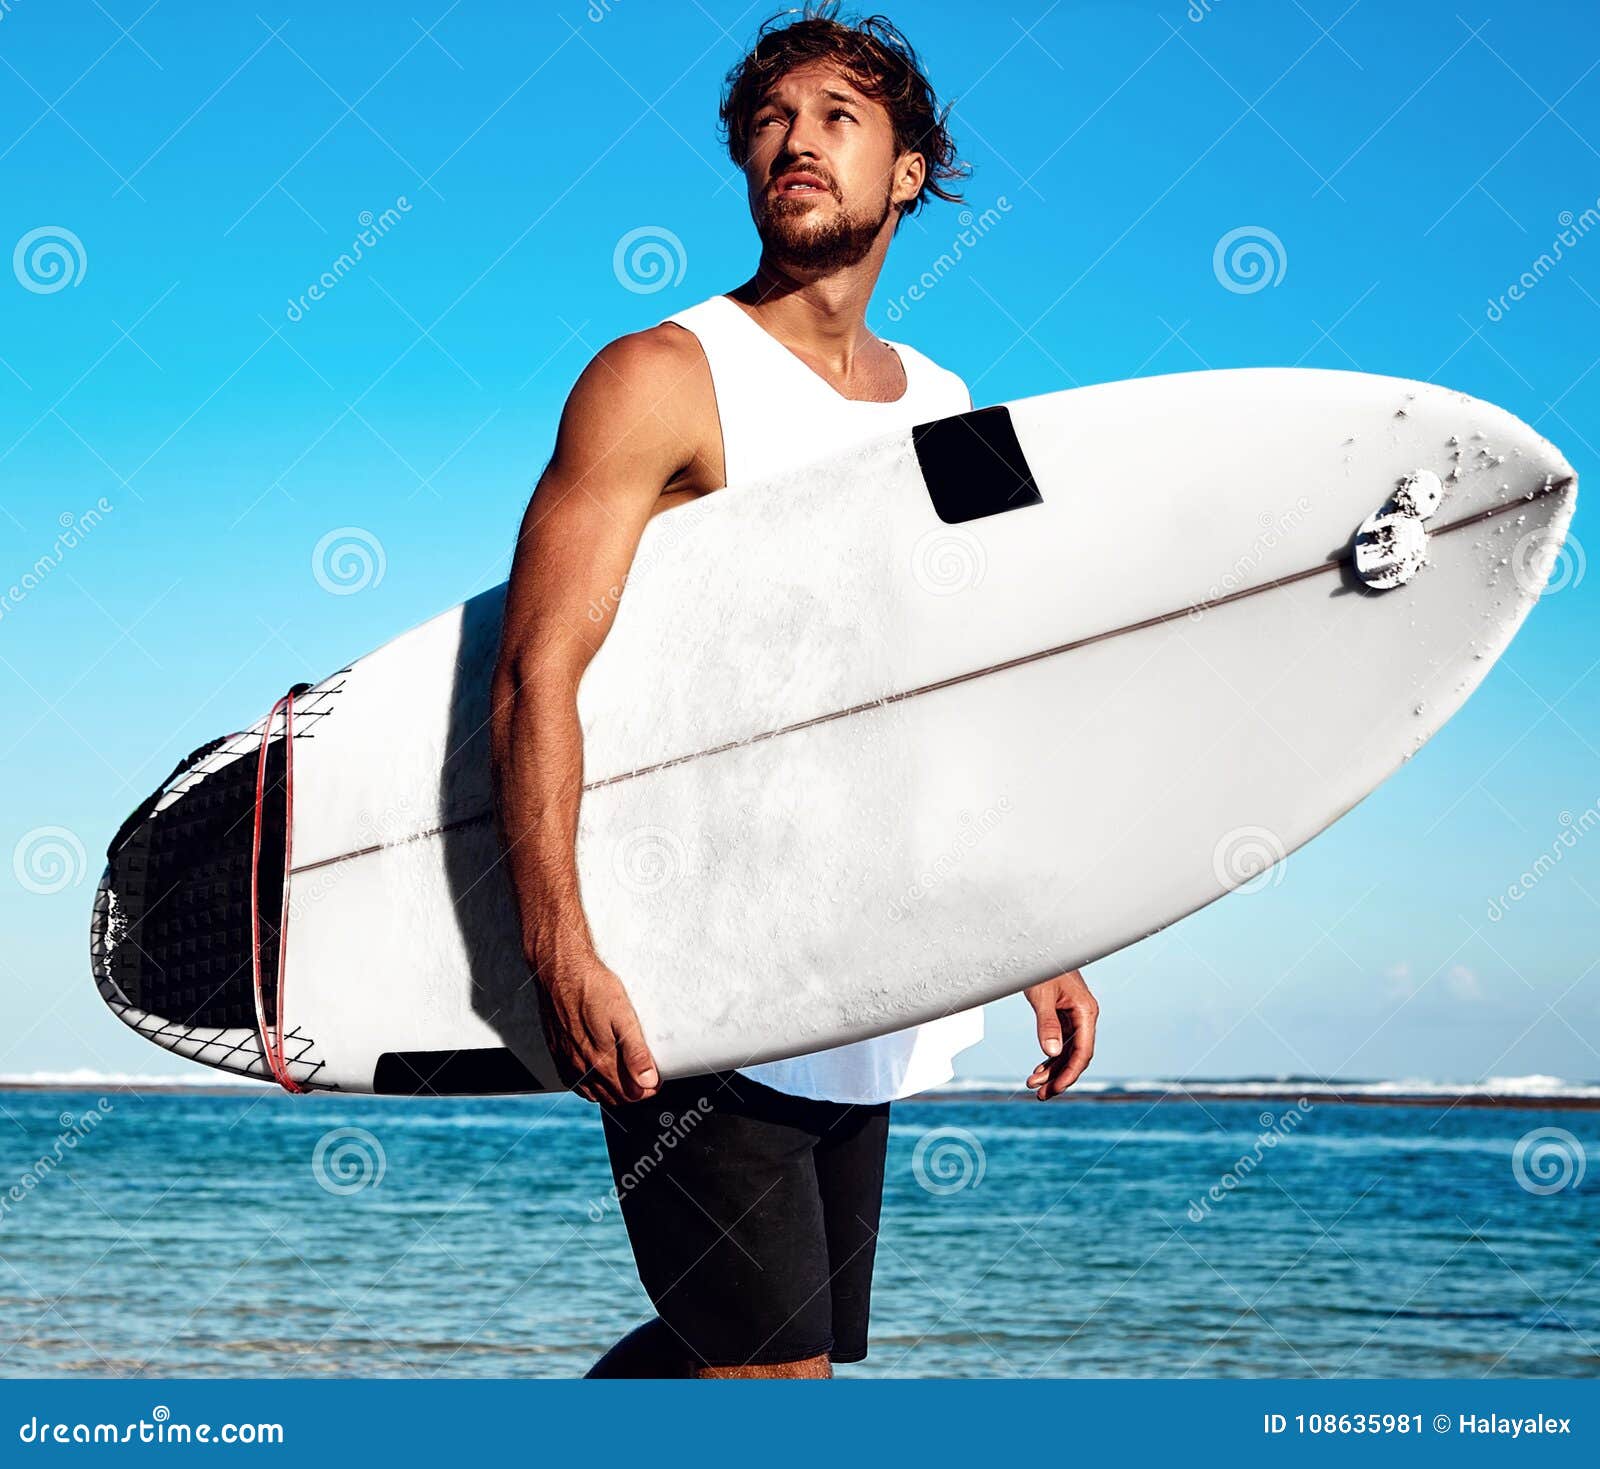 Model Surfer Wearing Casual Clothes Going with Surfboard on Blue Ocean ...